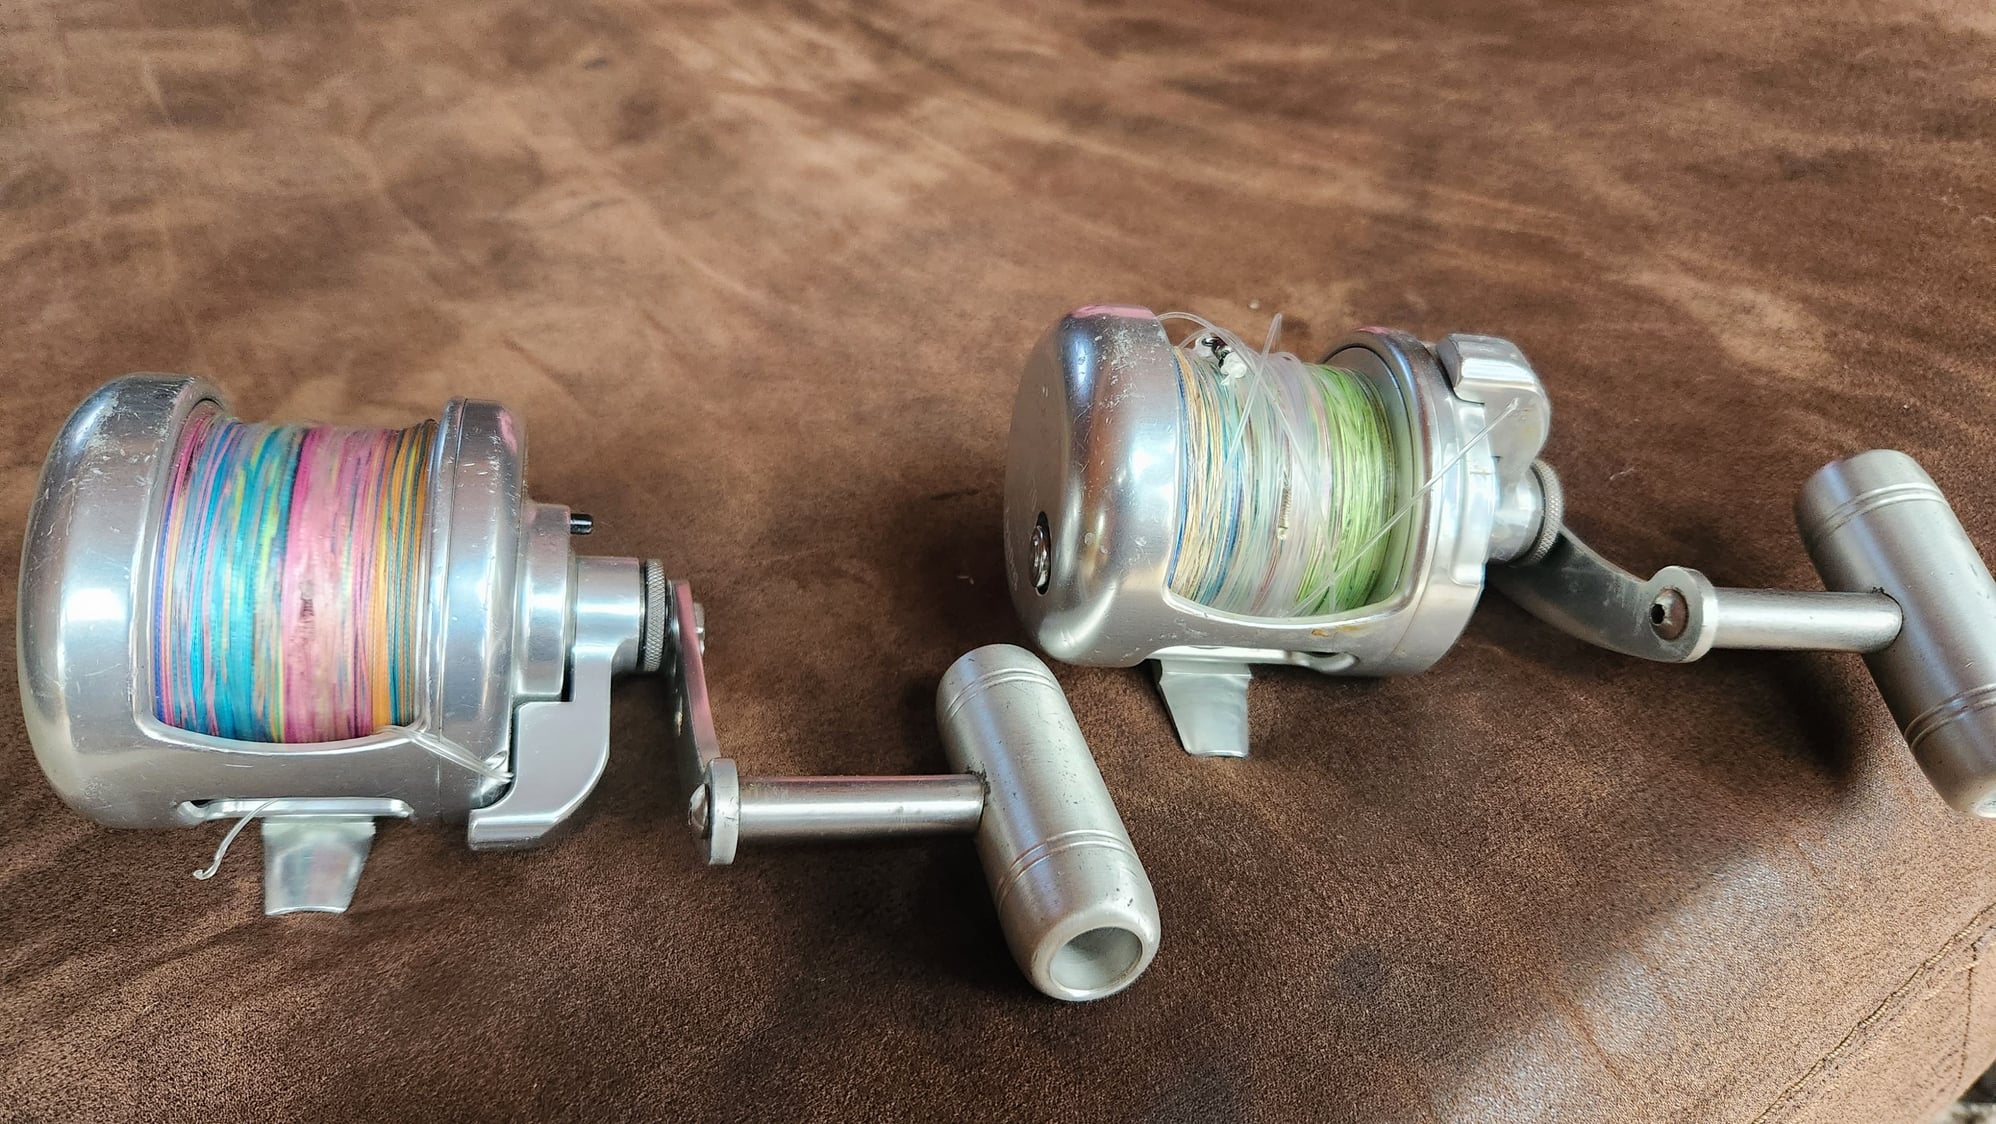 ACCURATE Reels for sale - The Hull Truth - Boating and Fishing Forum